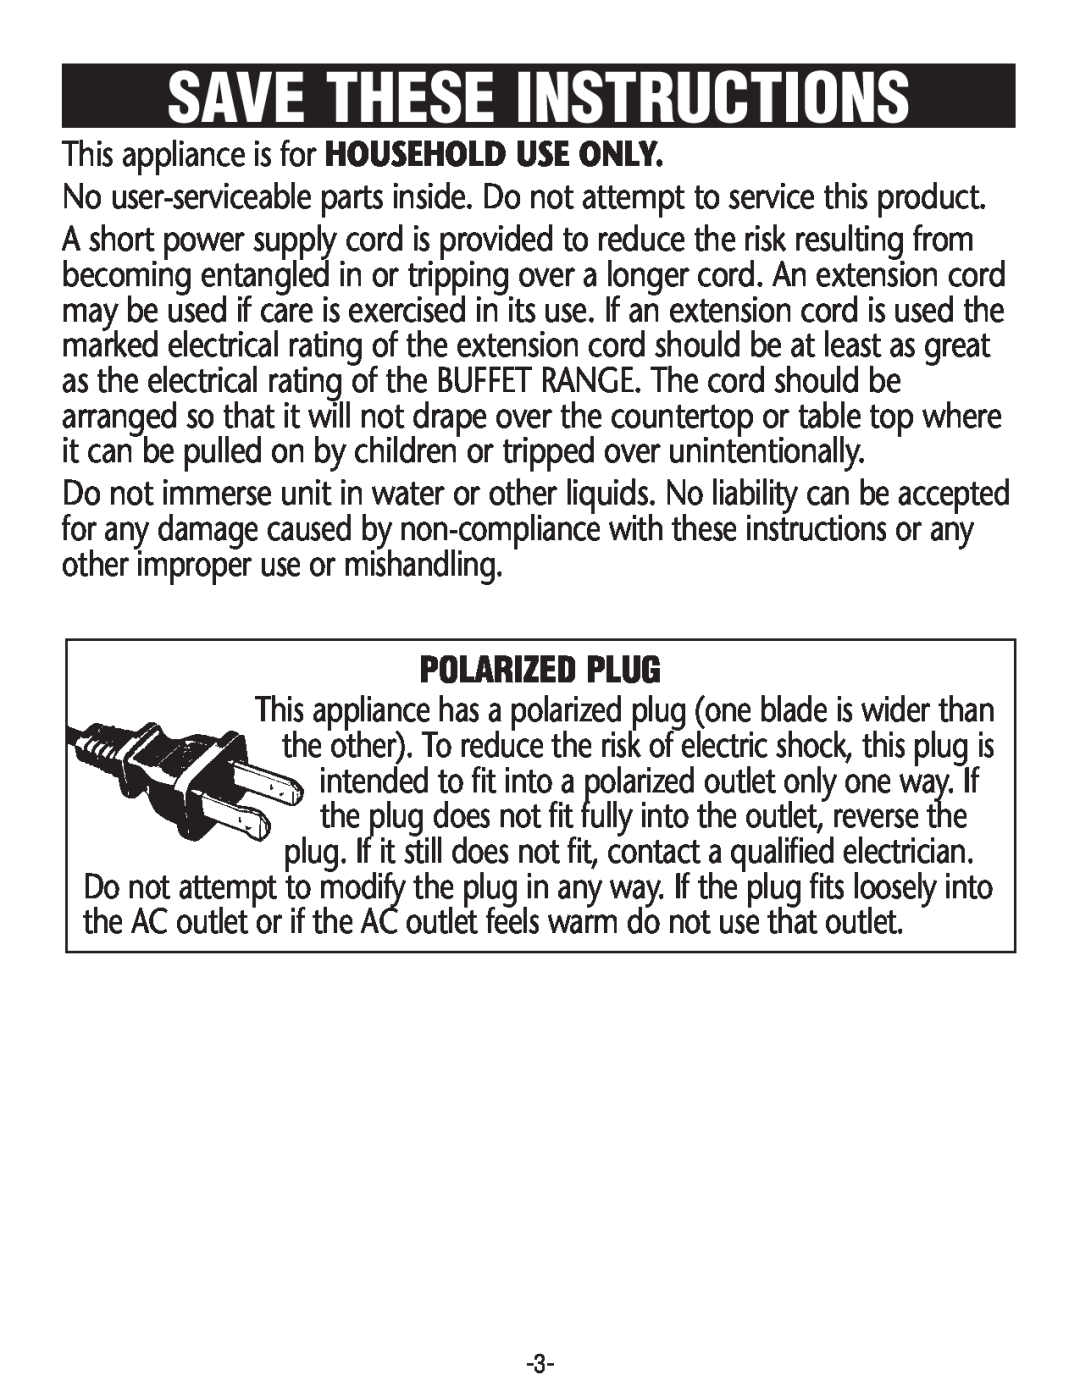 Rival BD275 manual Polarized Plug, Save These Instructions 